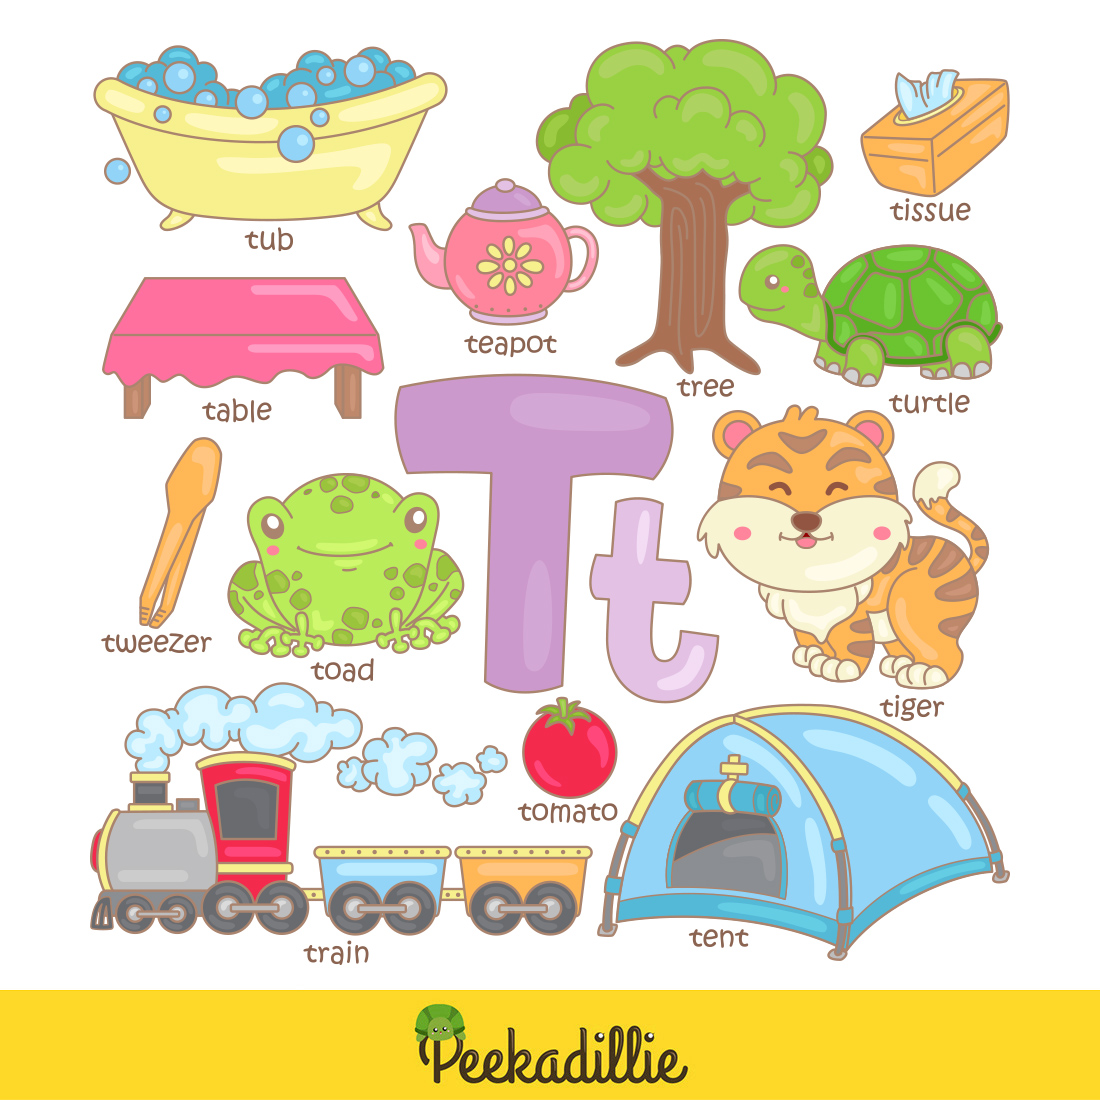 Alphabet T For Vocabulary School Letter Reading Writing Font Study Learning Student Toodler Kids Cartoon Lesson Tomato Tent Tub Tissue Turtle Train Tree Teapot Tiger Tweezer Table Toad Illustration Vector Clipart Cartoon preview image.